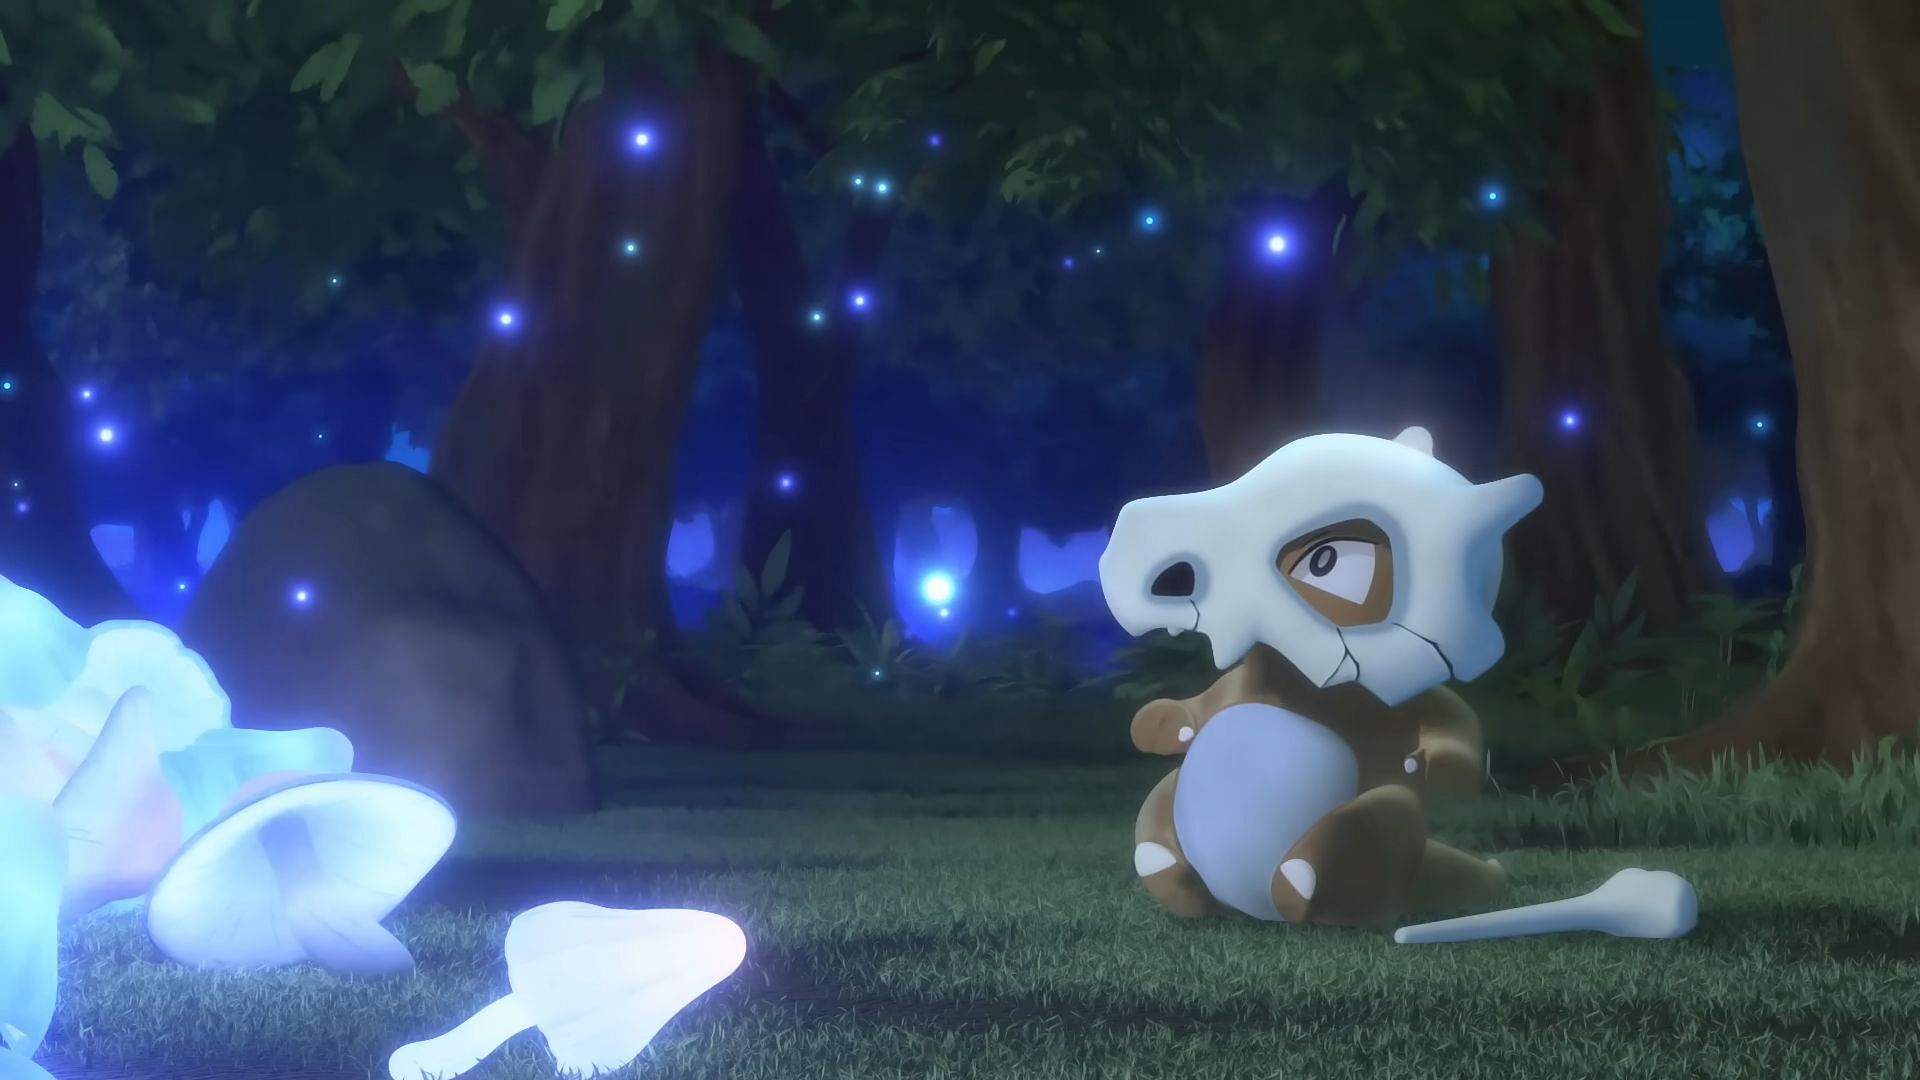 The Adventures of Cubone and Snorlax is one short shown in Pokemon TV fashion on YouTube (Image via The Pokemon Company)